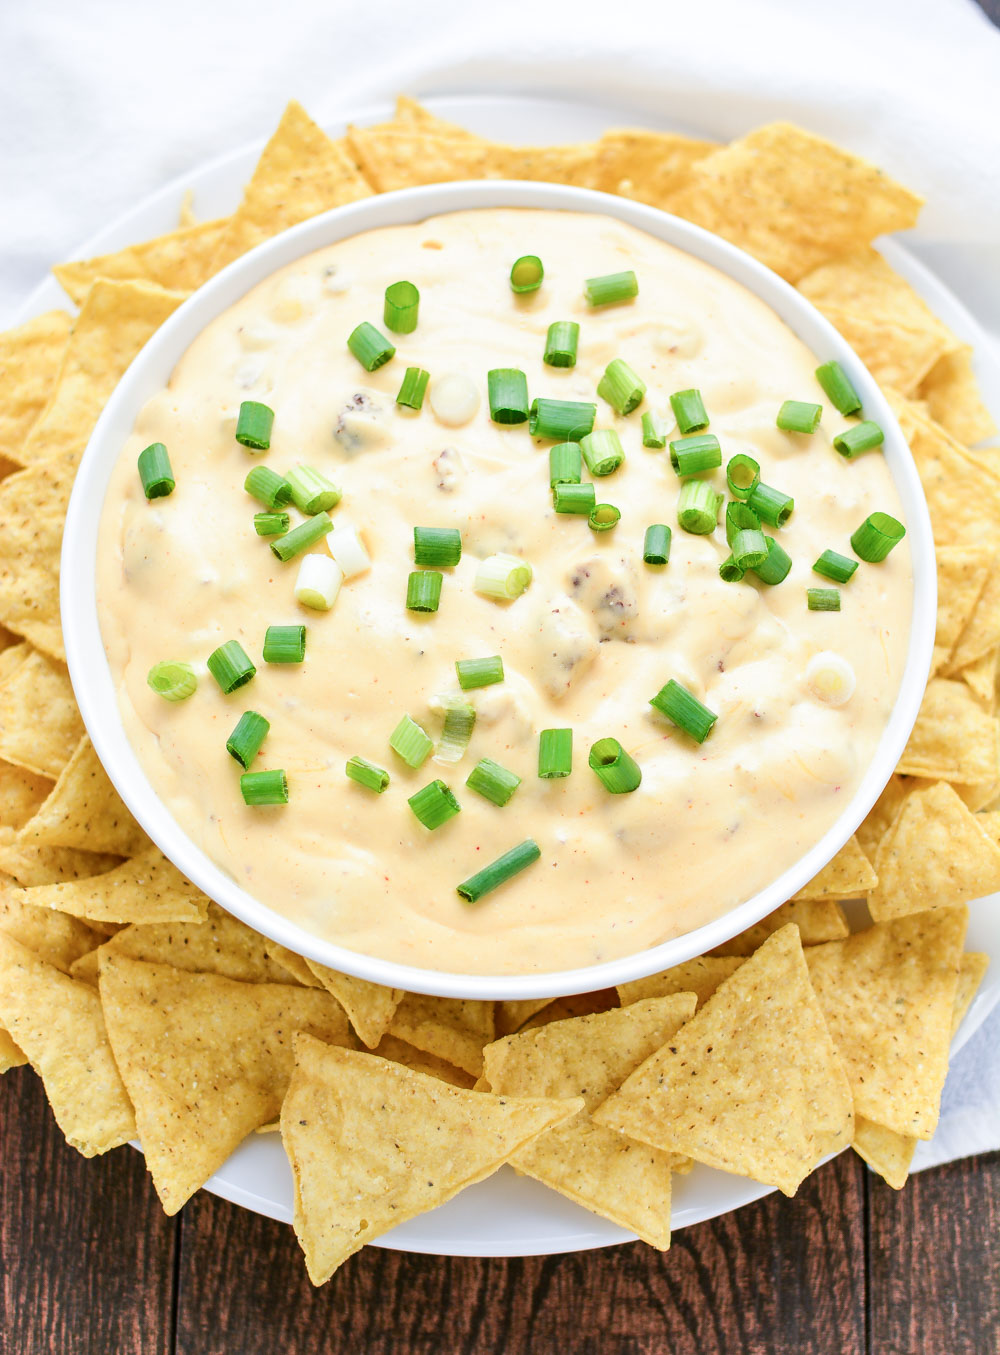 Slow Cooker Spicy Sausage Cheese Dip is the perfect game day recipe highlighting savory ground pork sausage, tons of cheese, and spices to compliment!